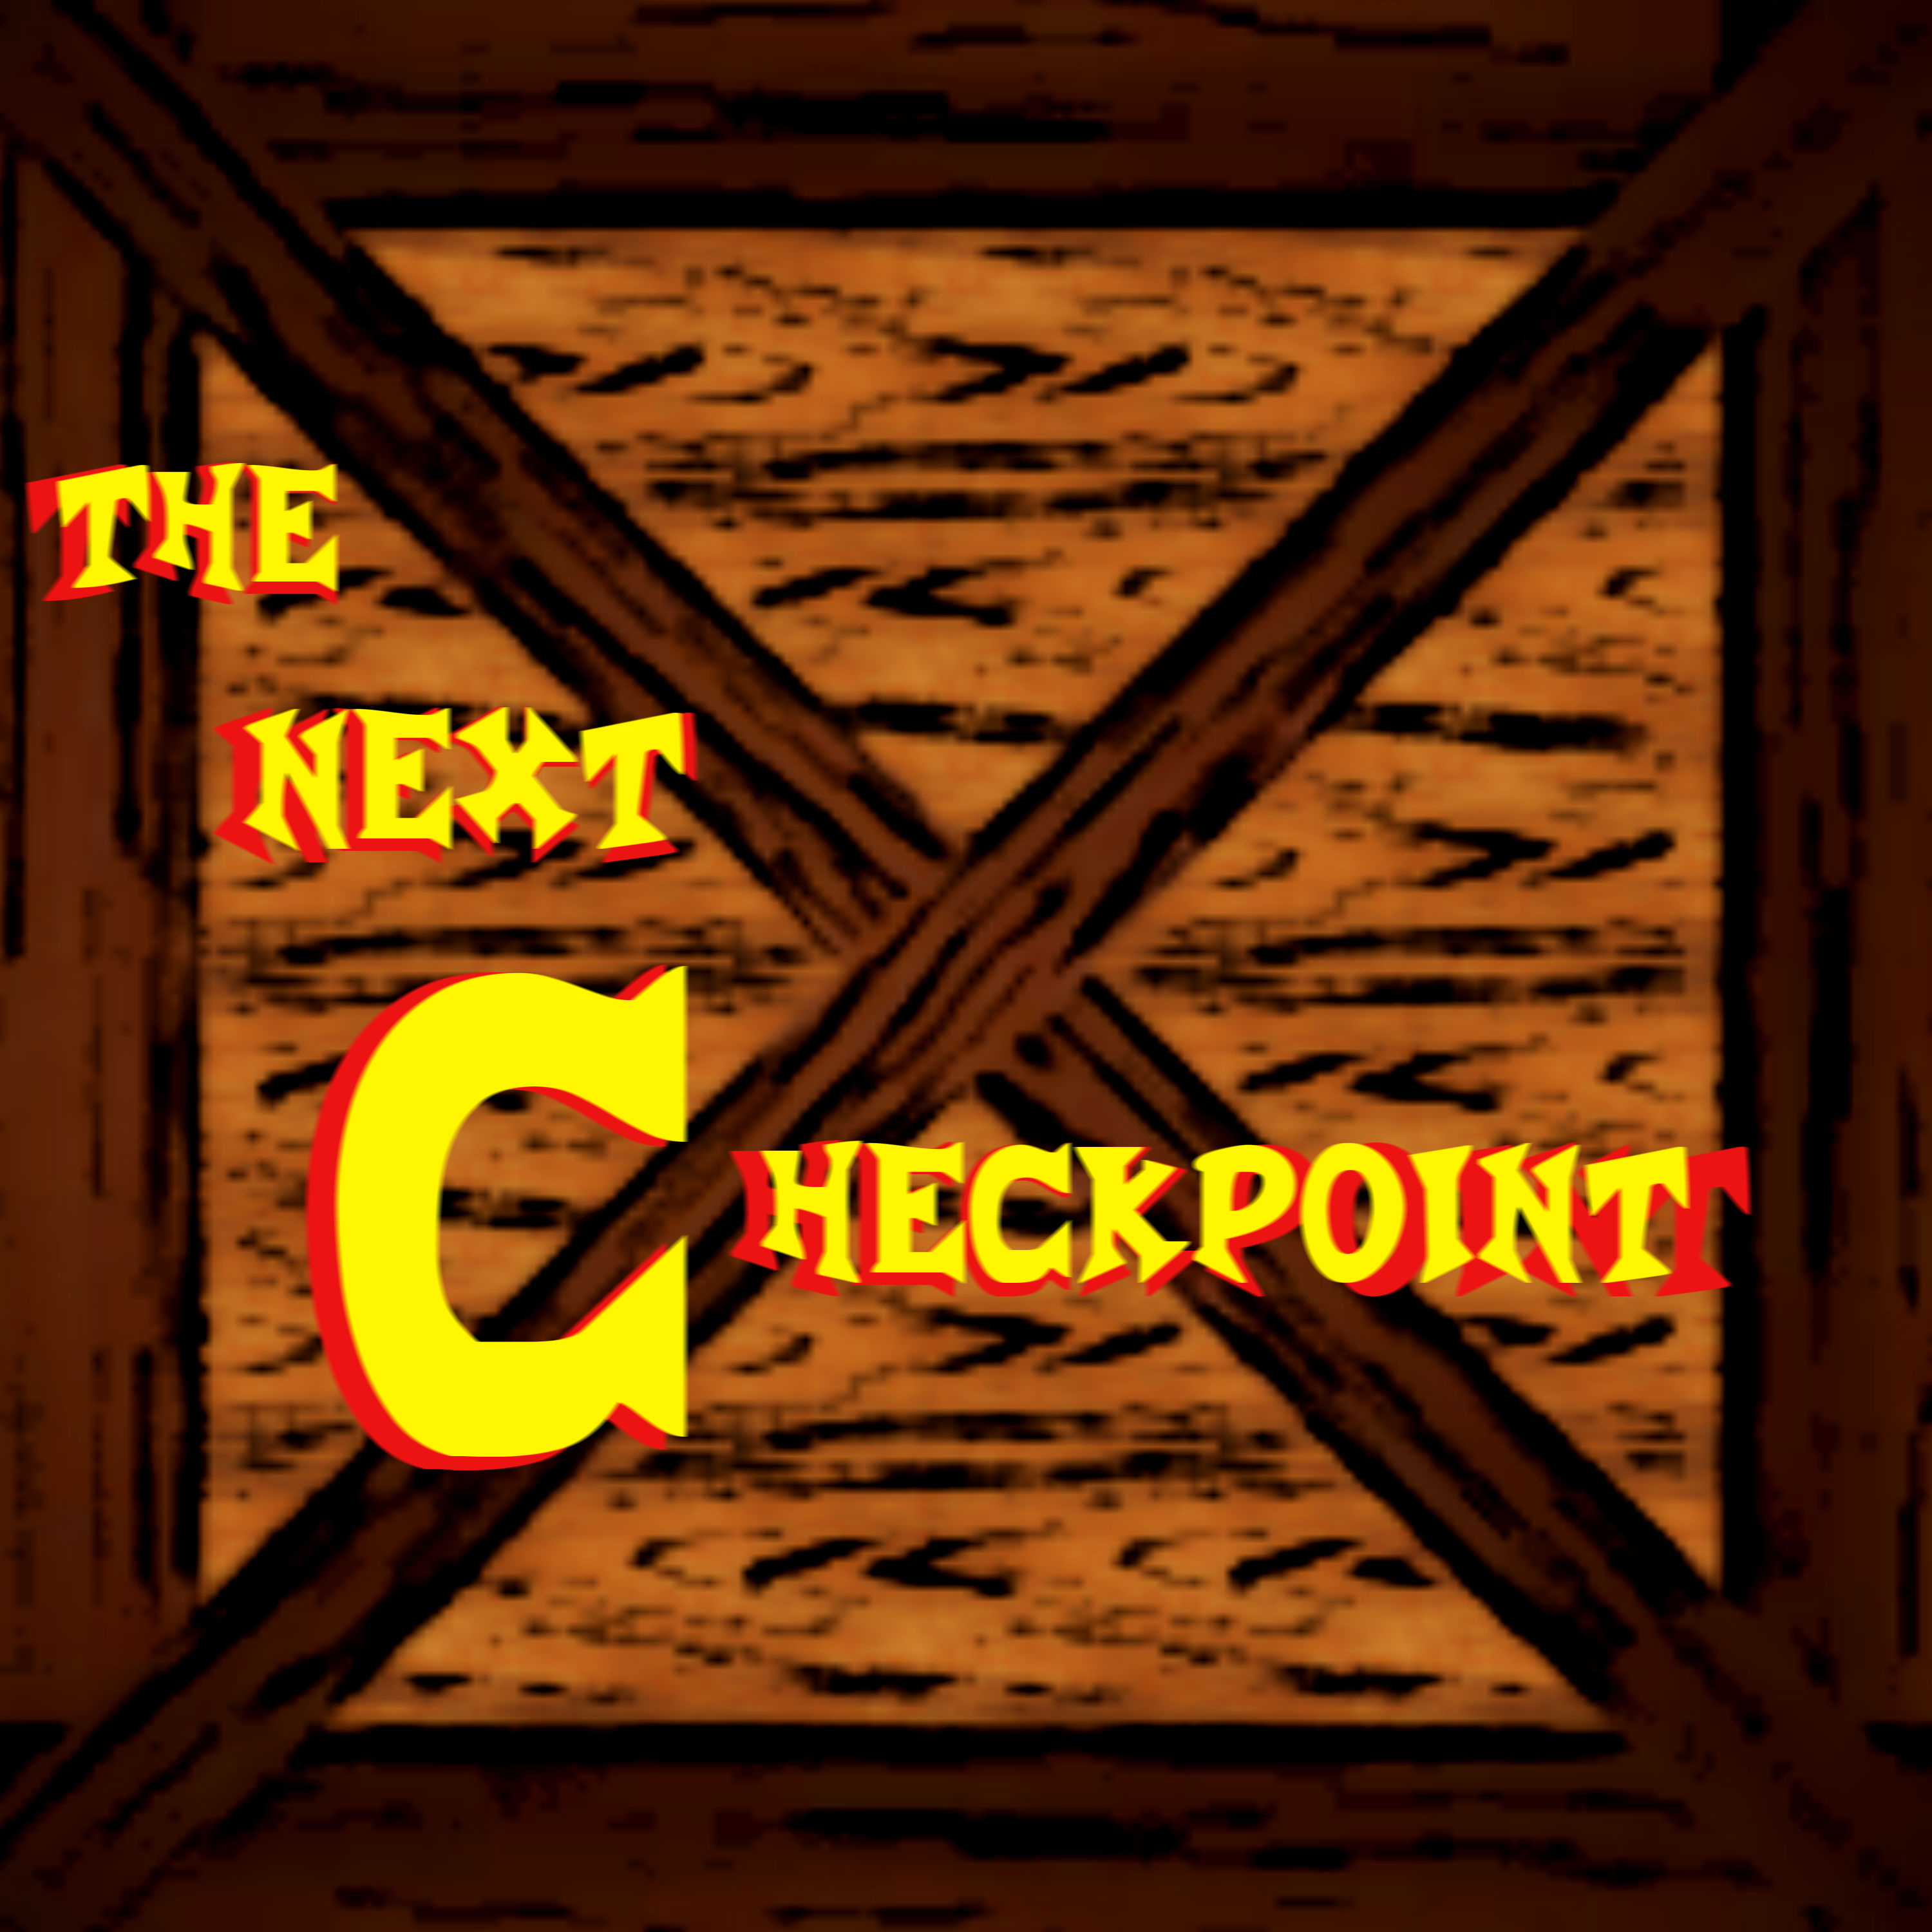 Next Checkpoint episode 8: Konami has done a naughty..... Again